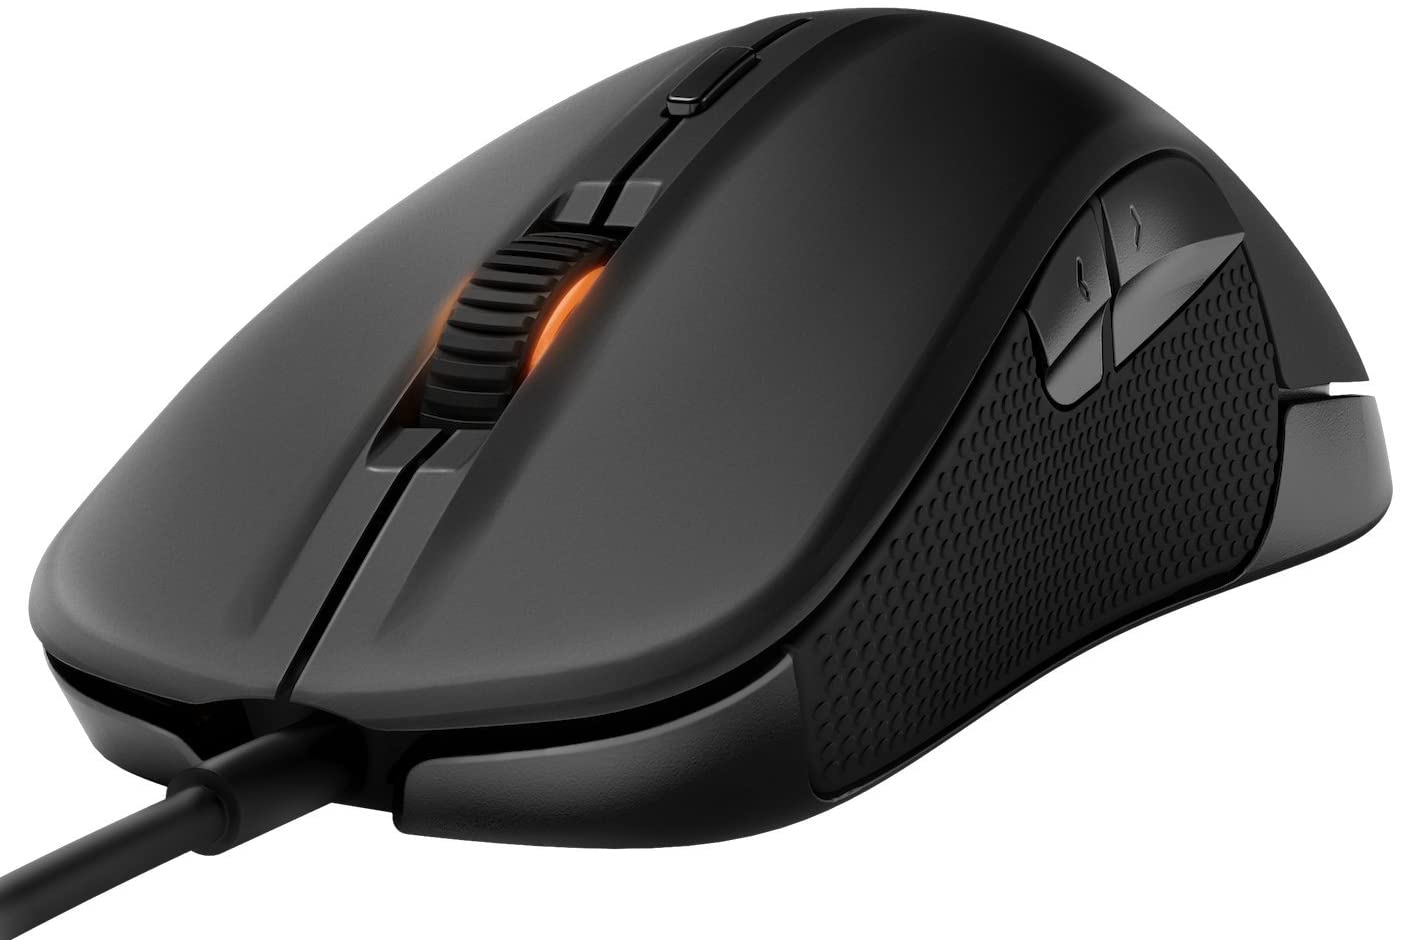 SteelSeries Rival 300 Optical Gaming Mouse